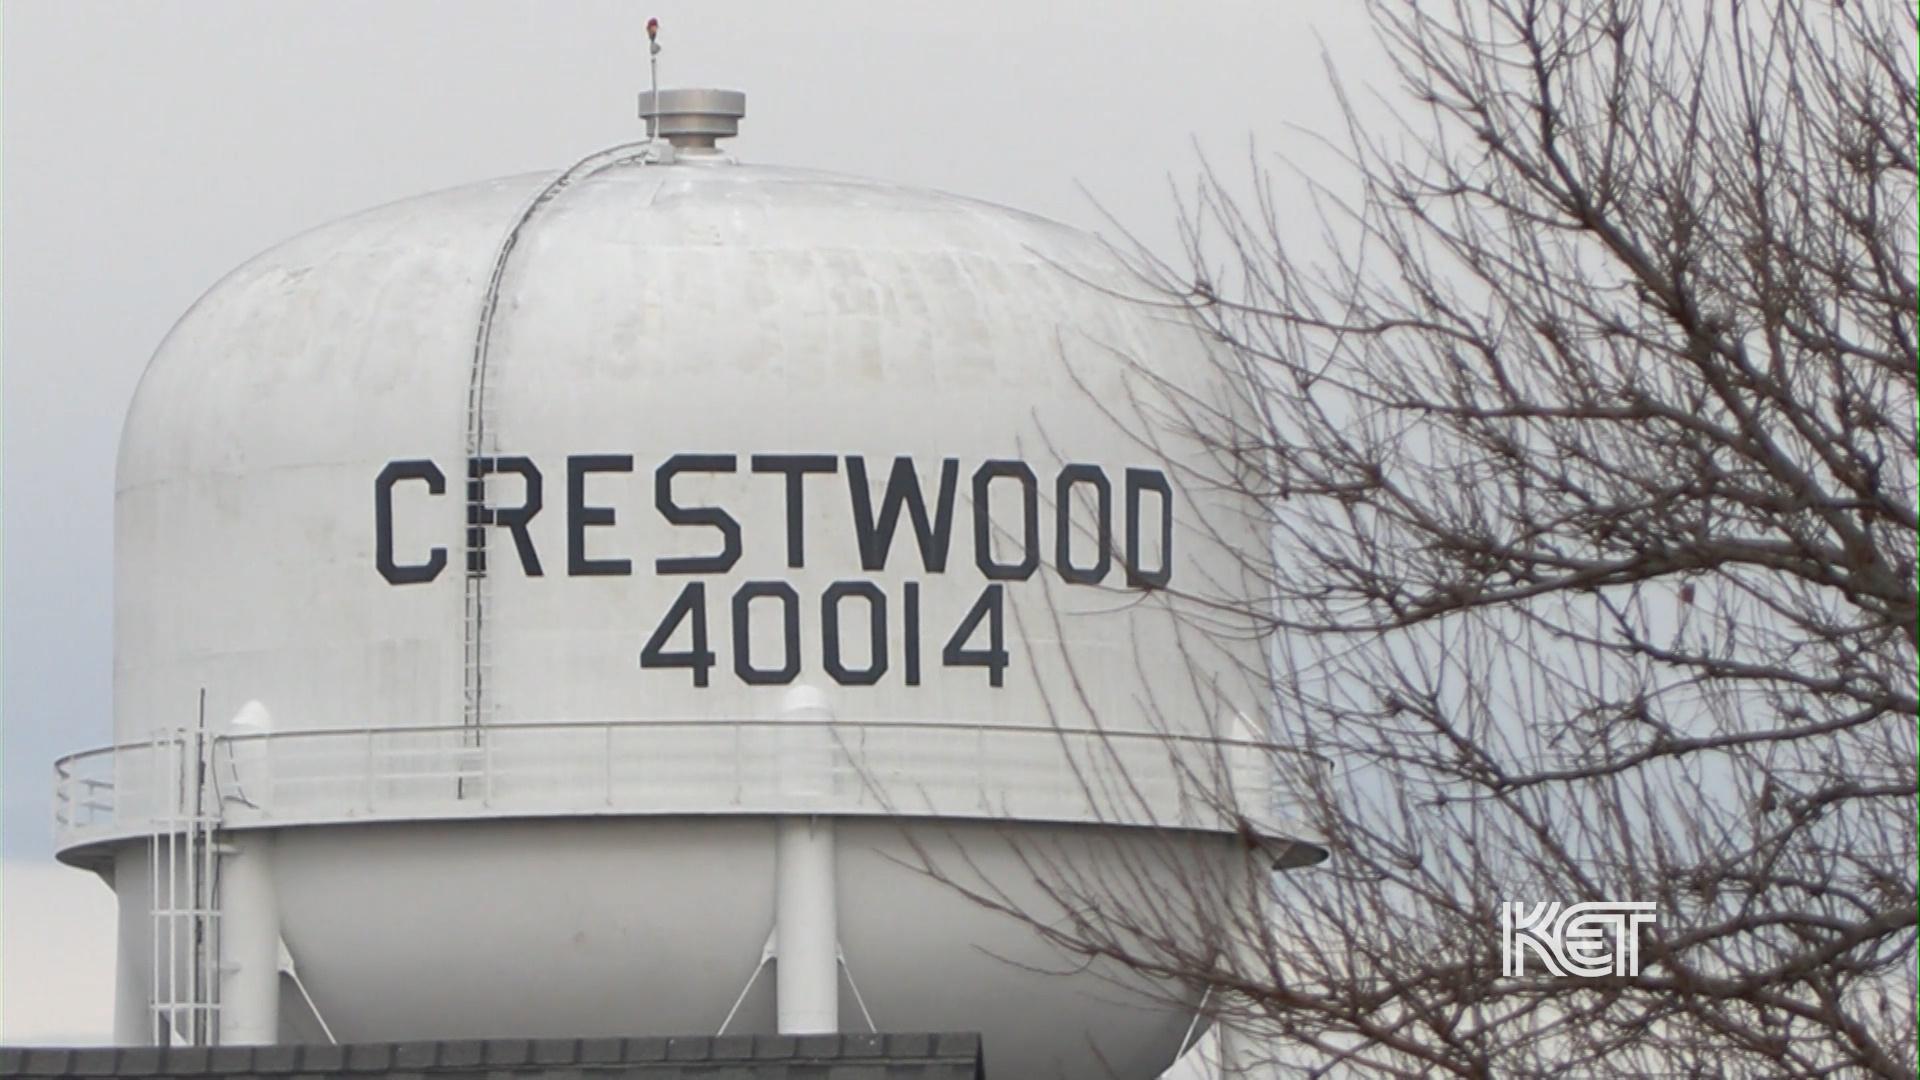 Crestwood is Expecting Big Changes